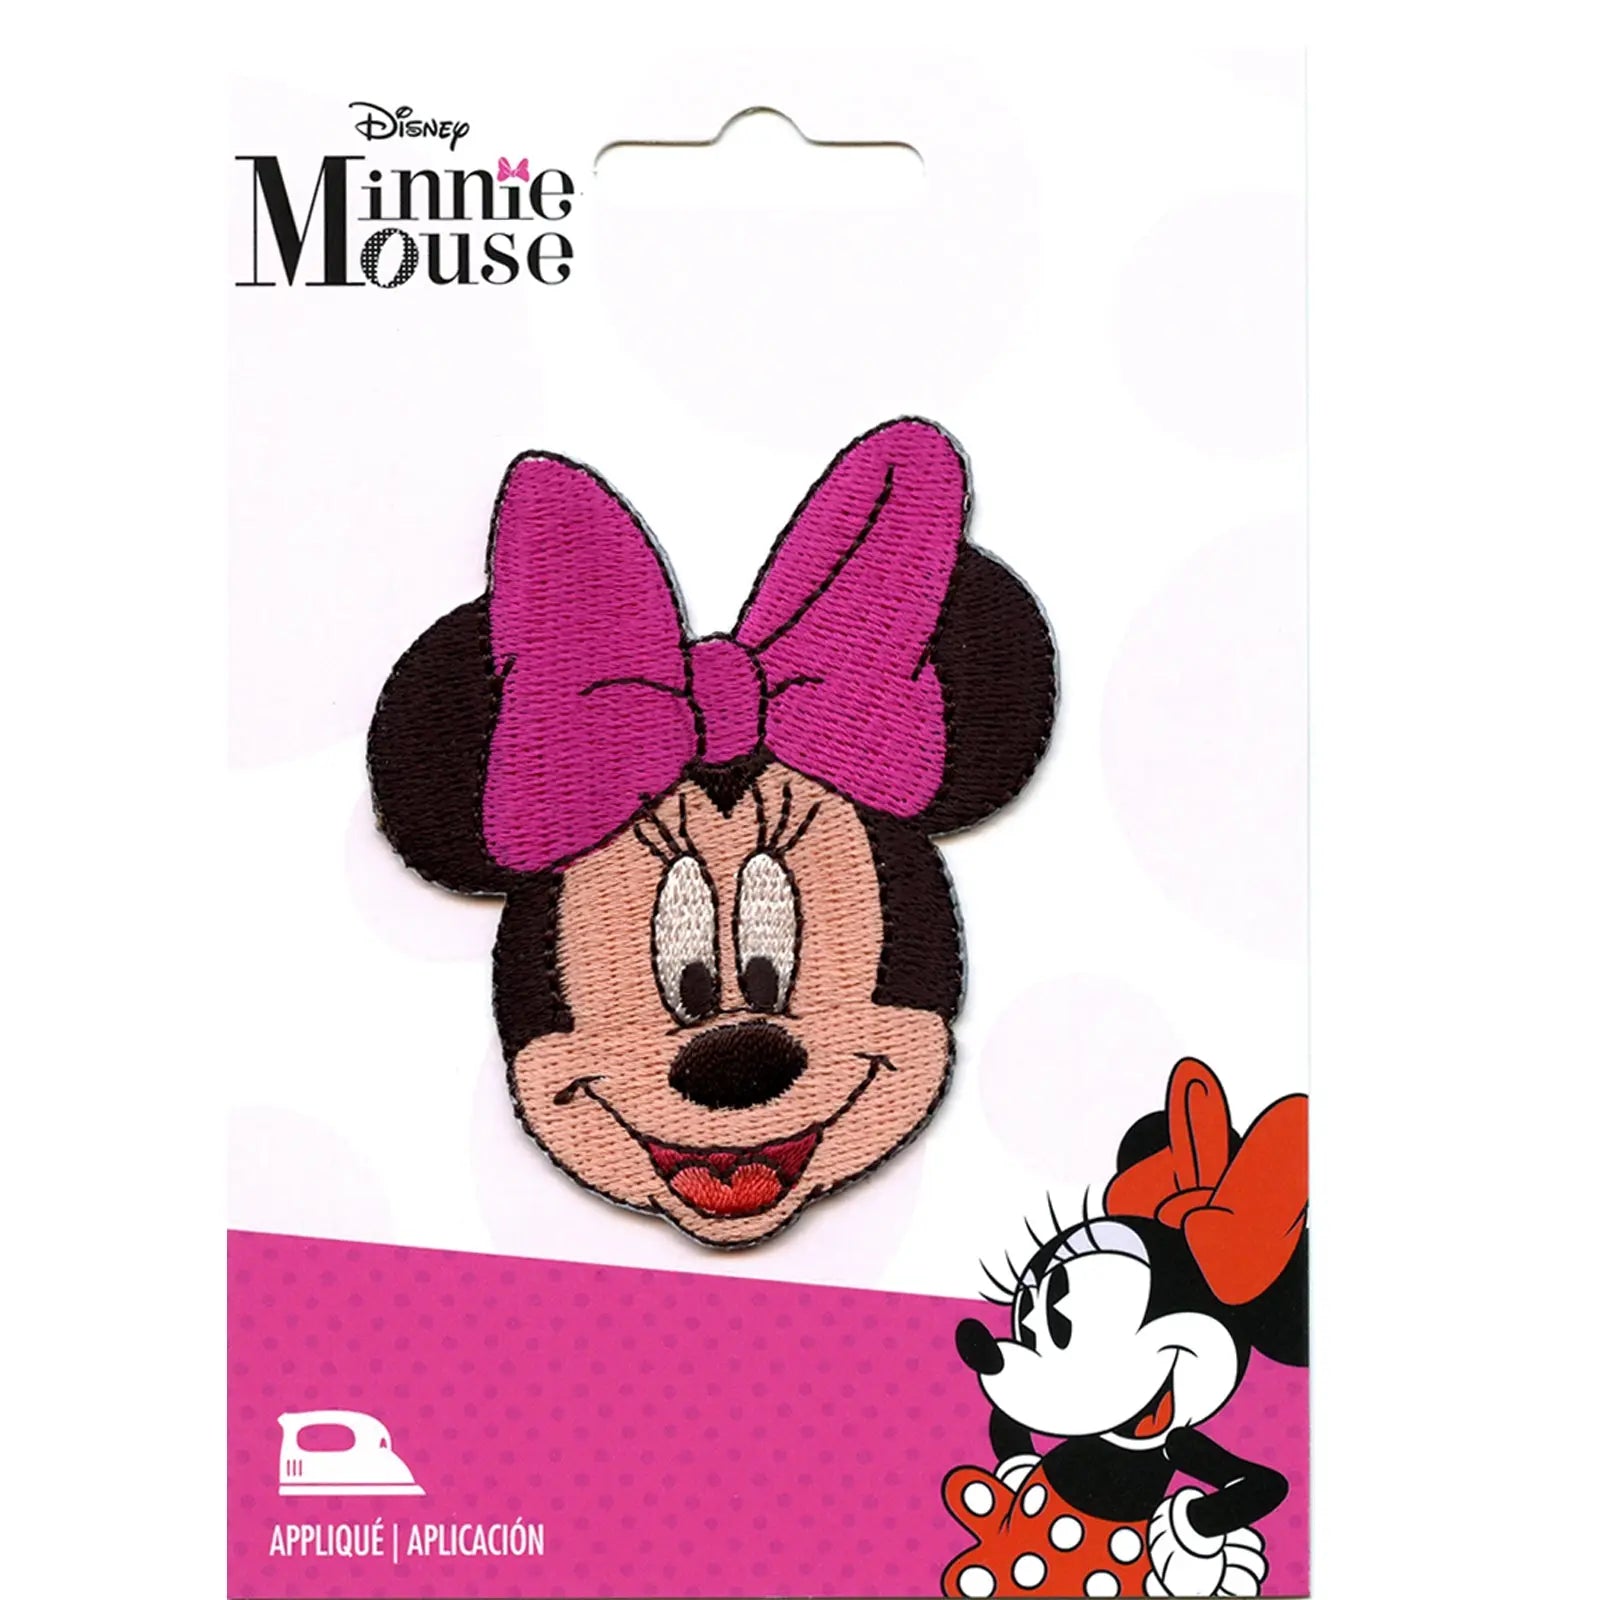 Minnie Mouse Iron On Transfer For Light or Dark Fabric